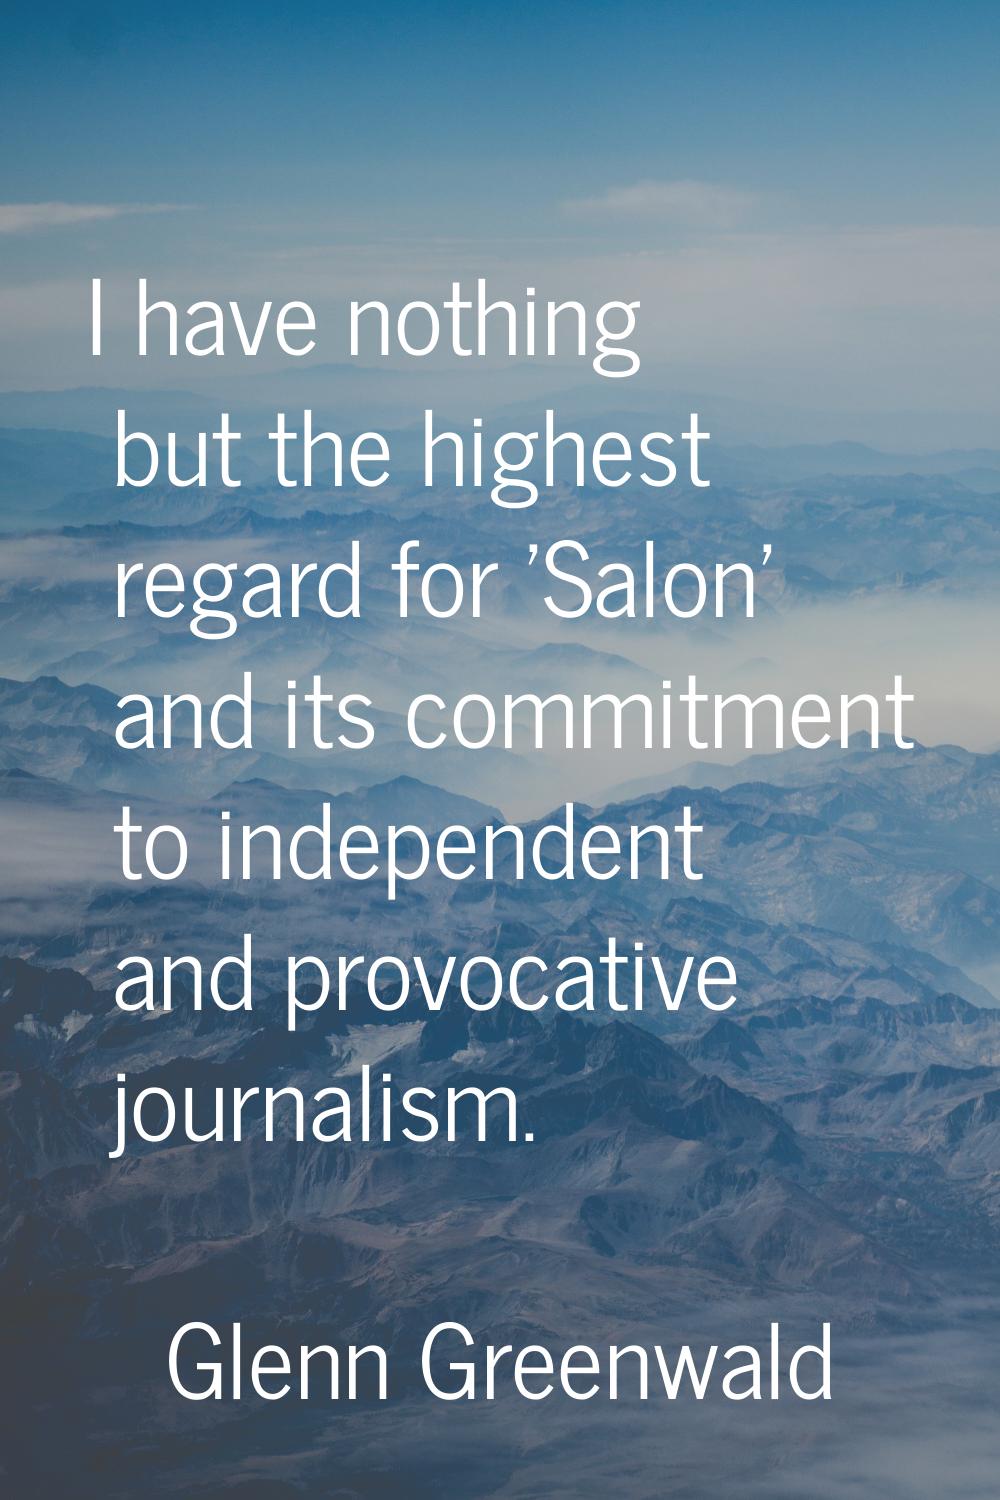 I have nothing but the highest regard for 'Salon' and its commitment to independent and provocative